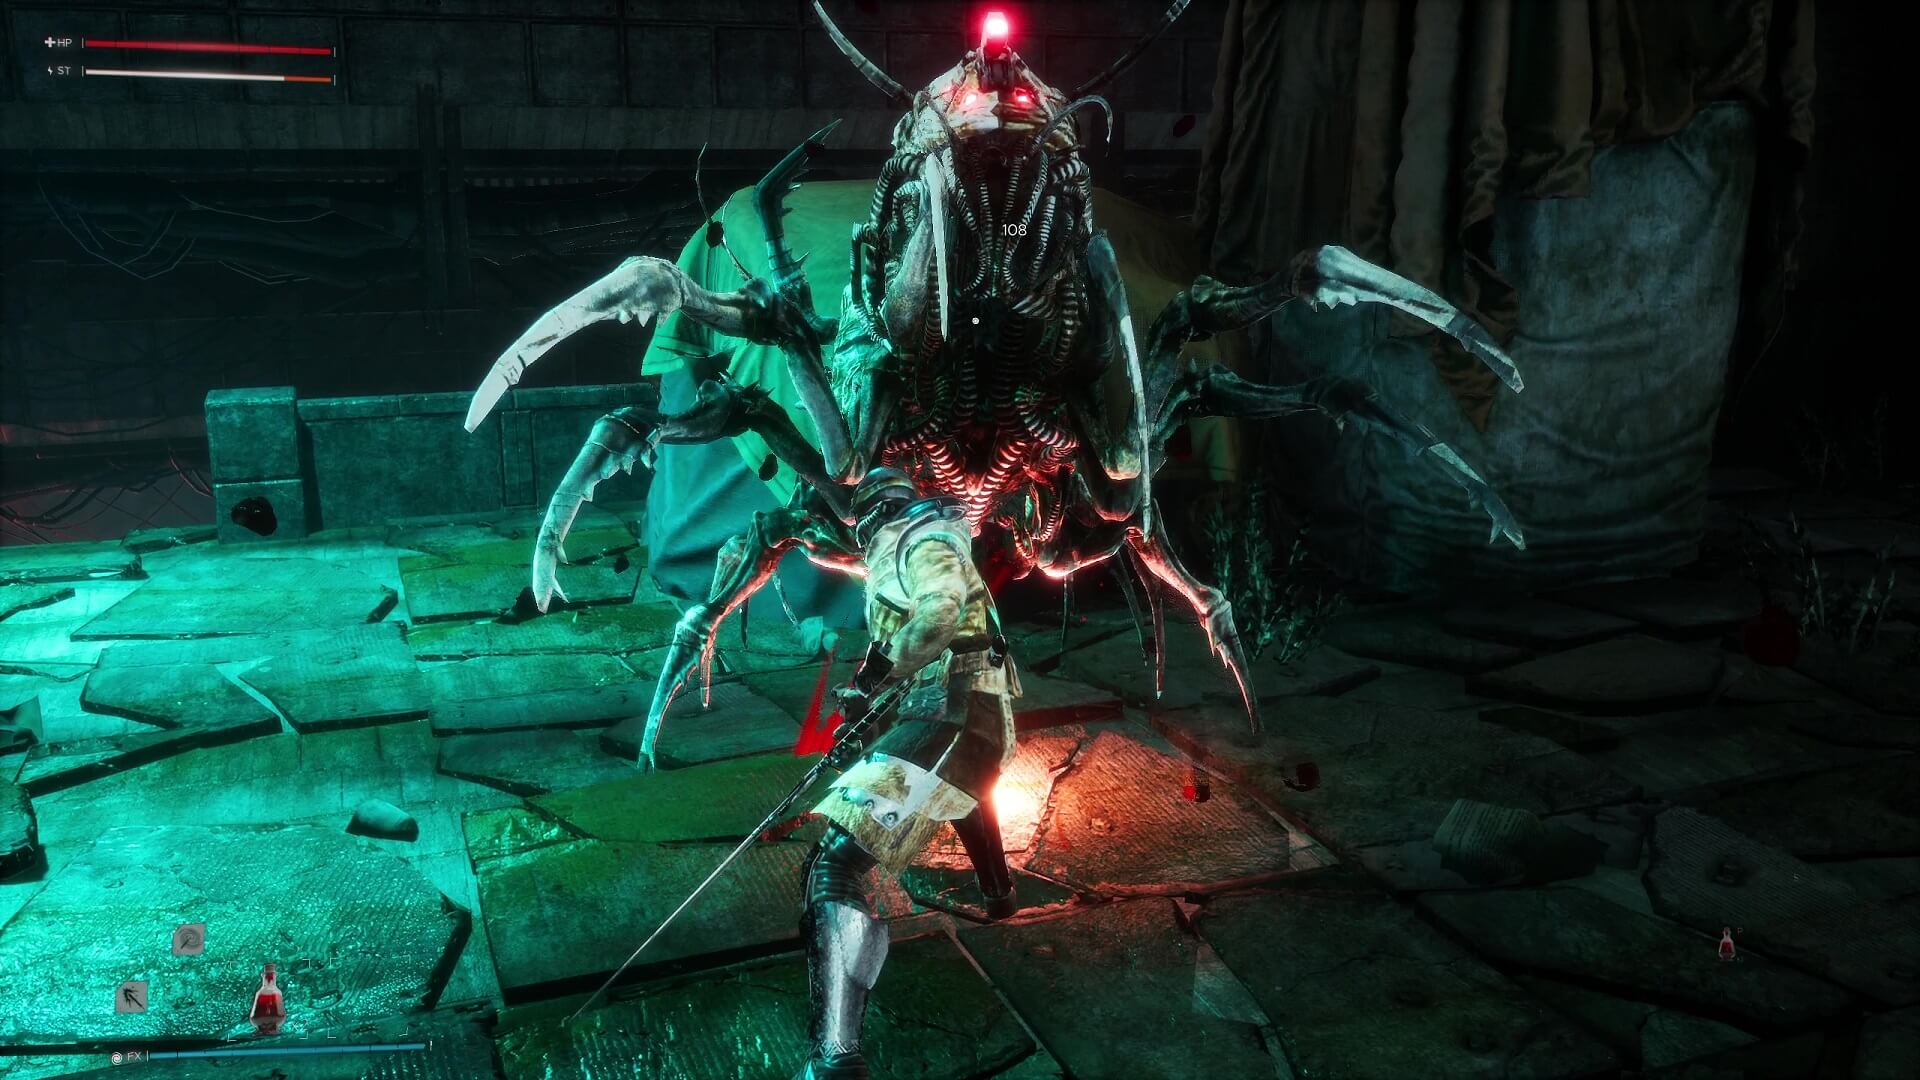 An insect enemy rearing up to attack in Bleak Faith: Forsaken